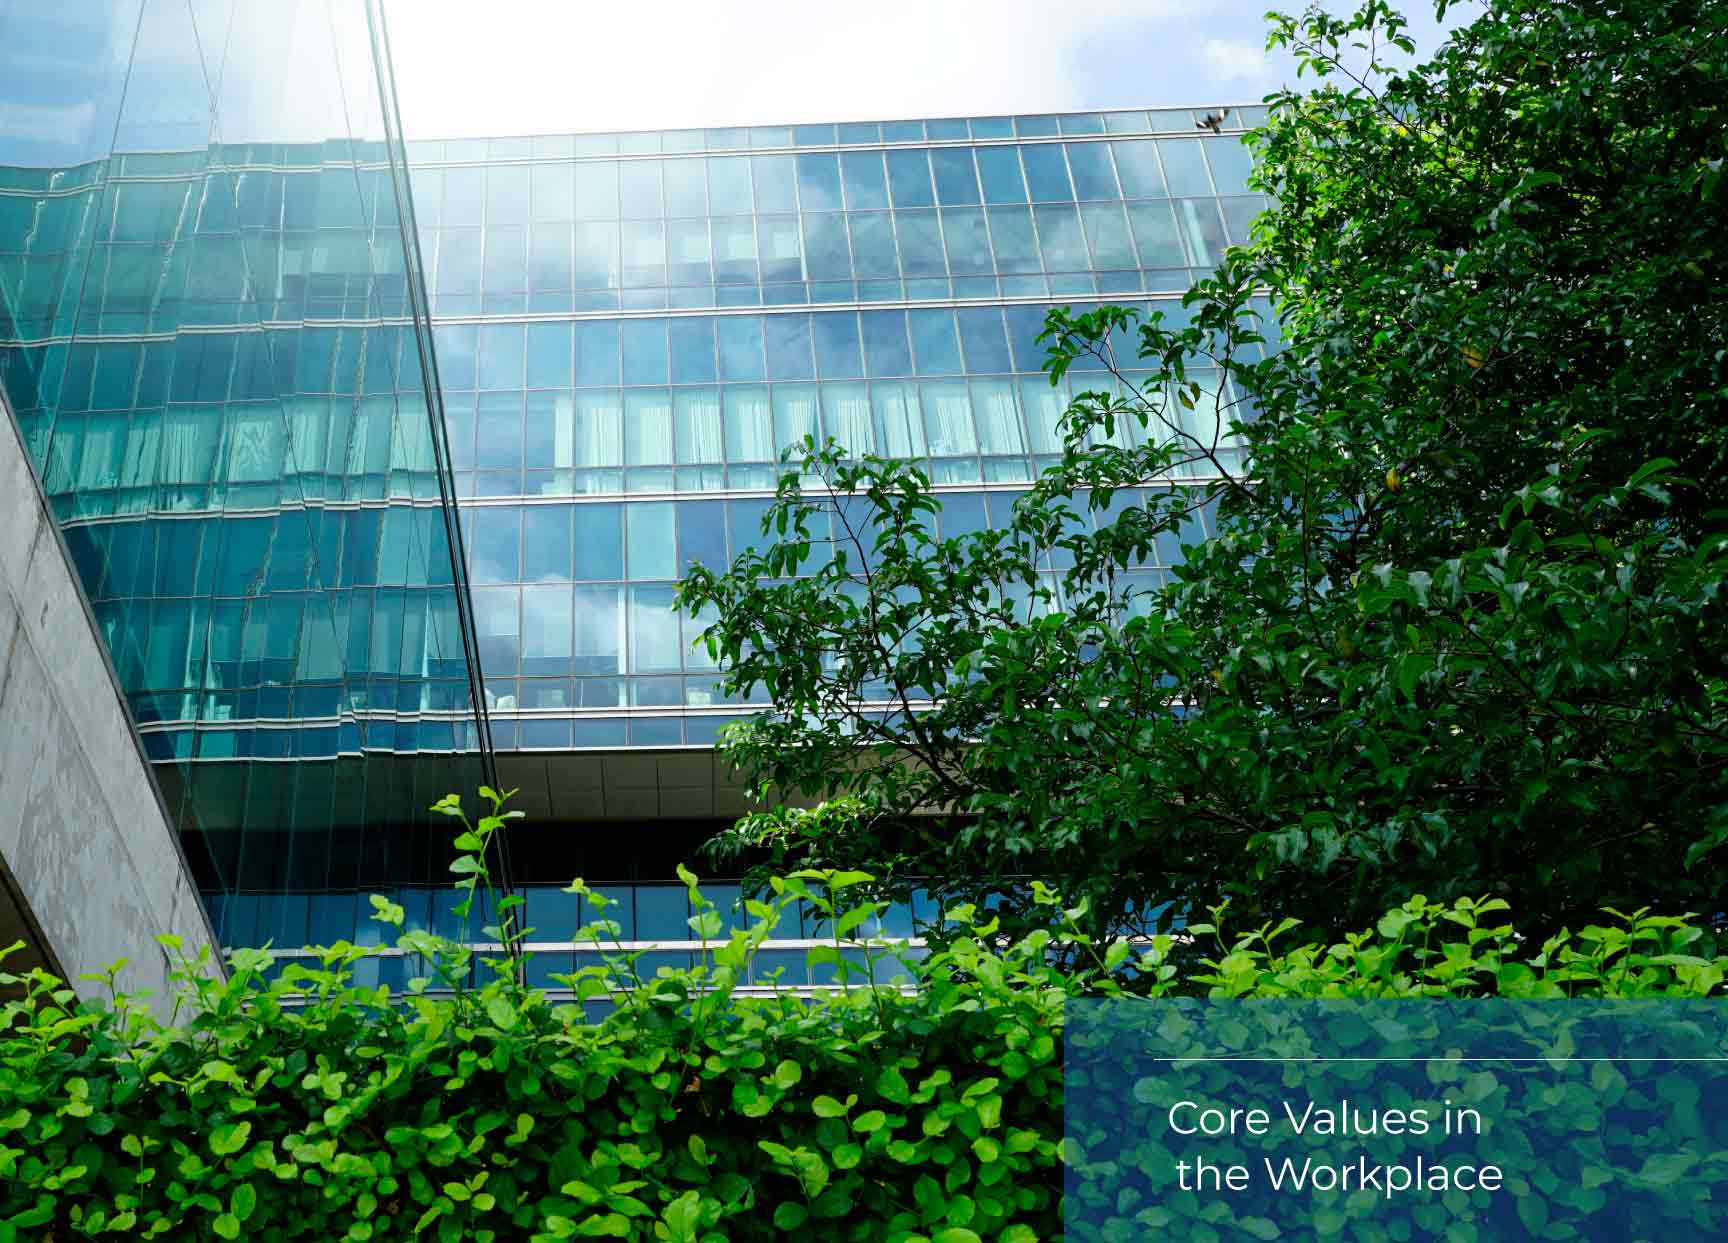 Resources on core values for the workplace